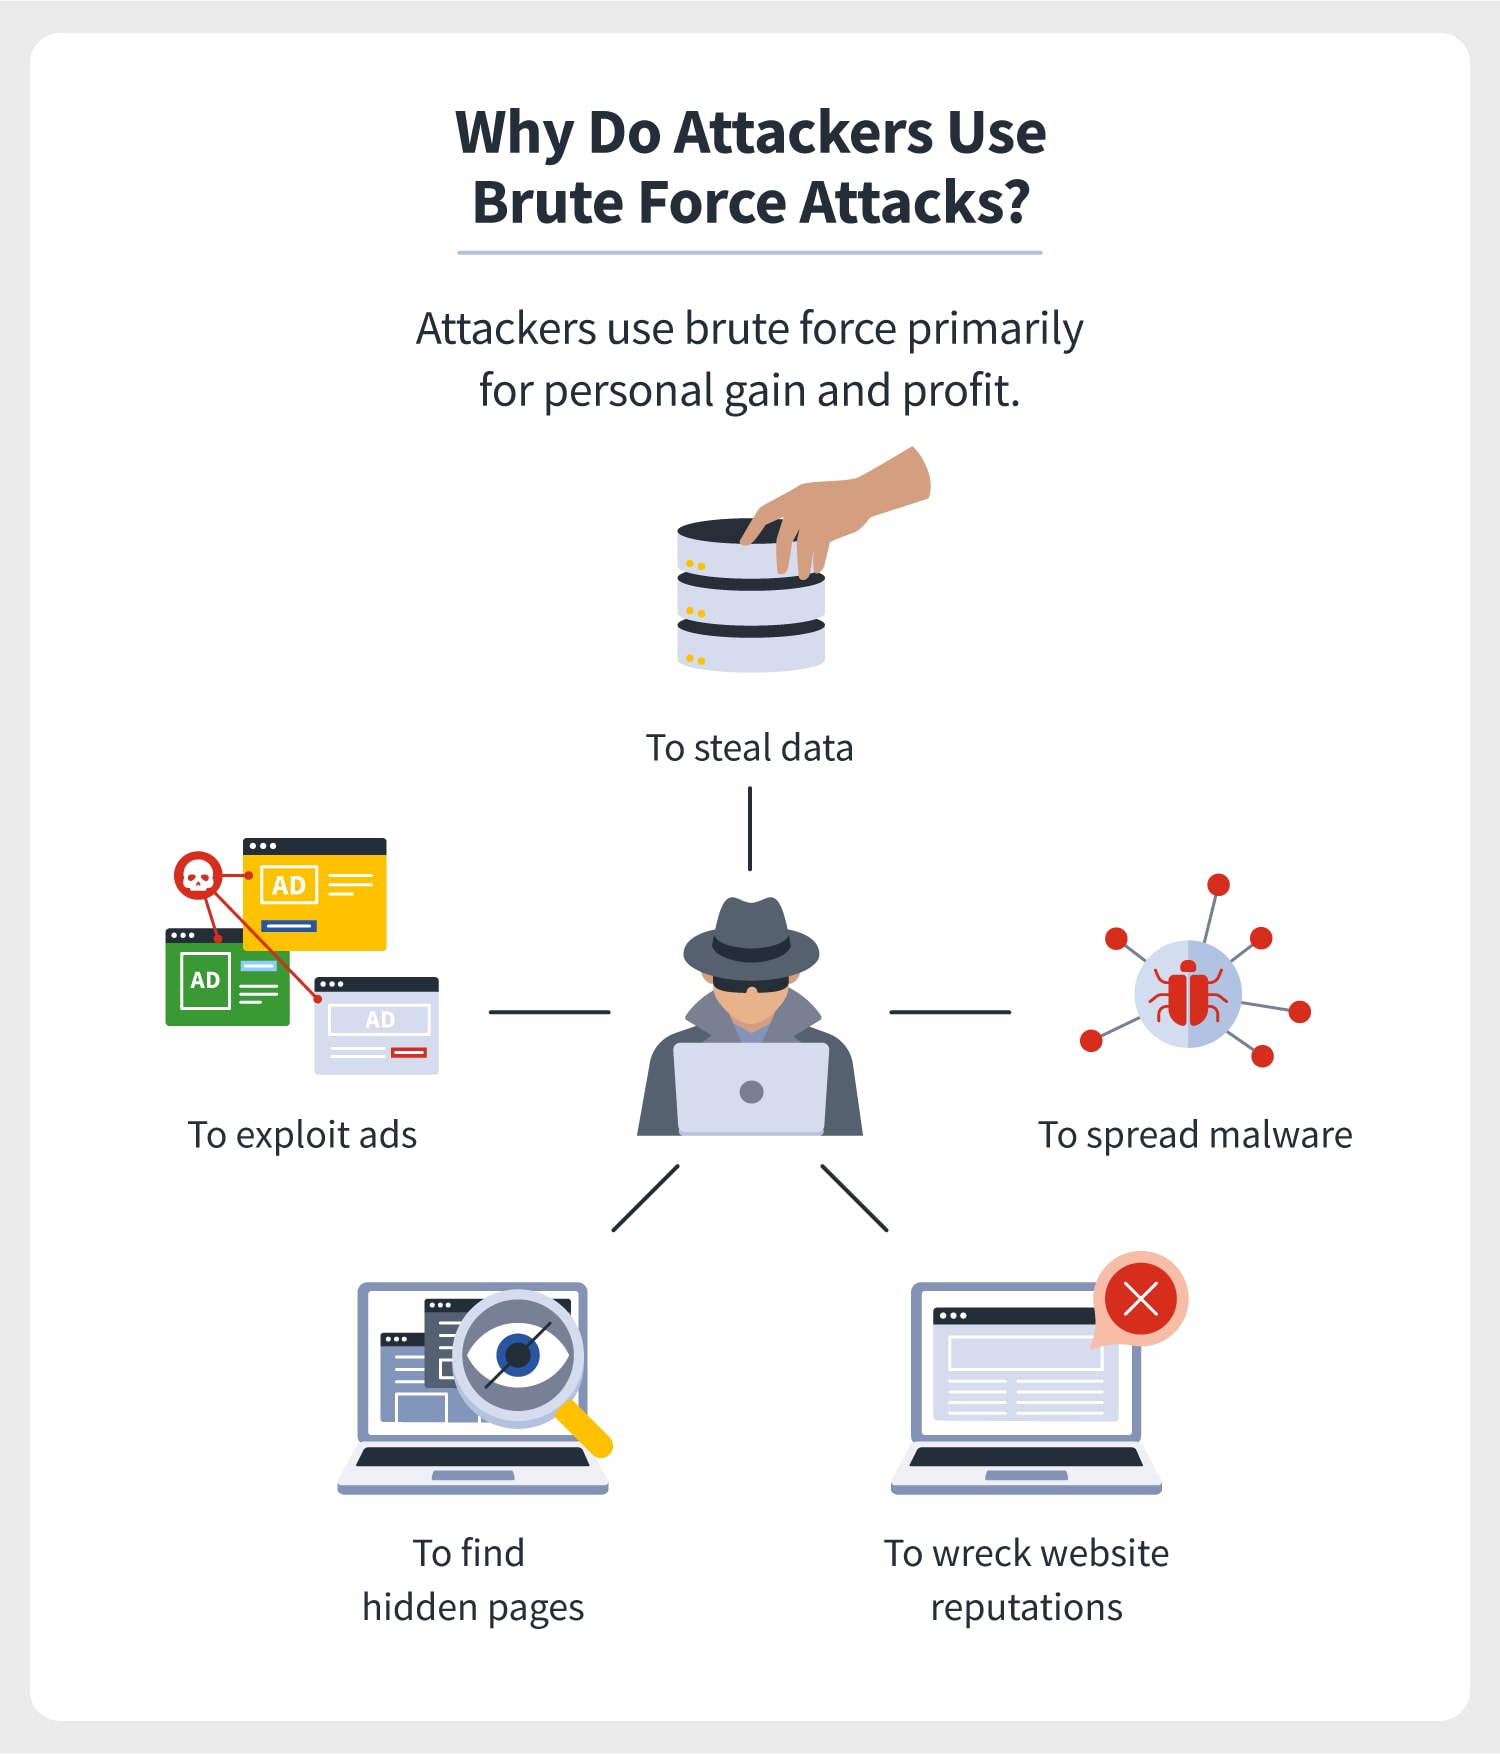 Five illustrations accompany reasons why attackers use brute force attacks: to steal data, spread malware, wreck reputations, find hidden pages, and exploit ads. 